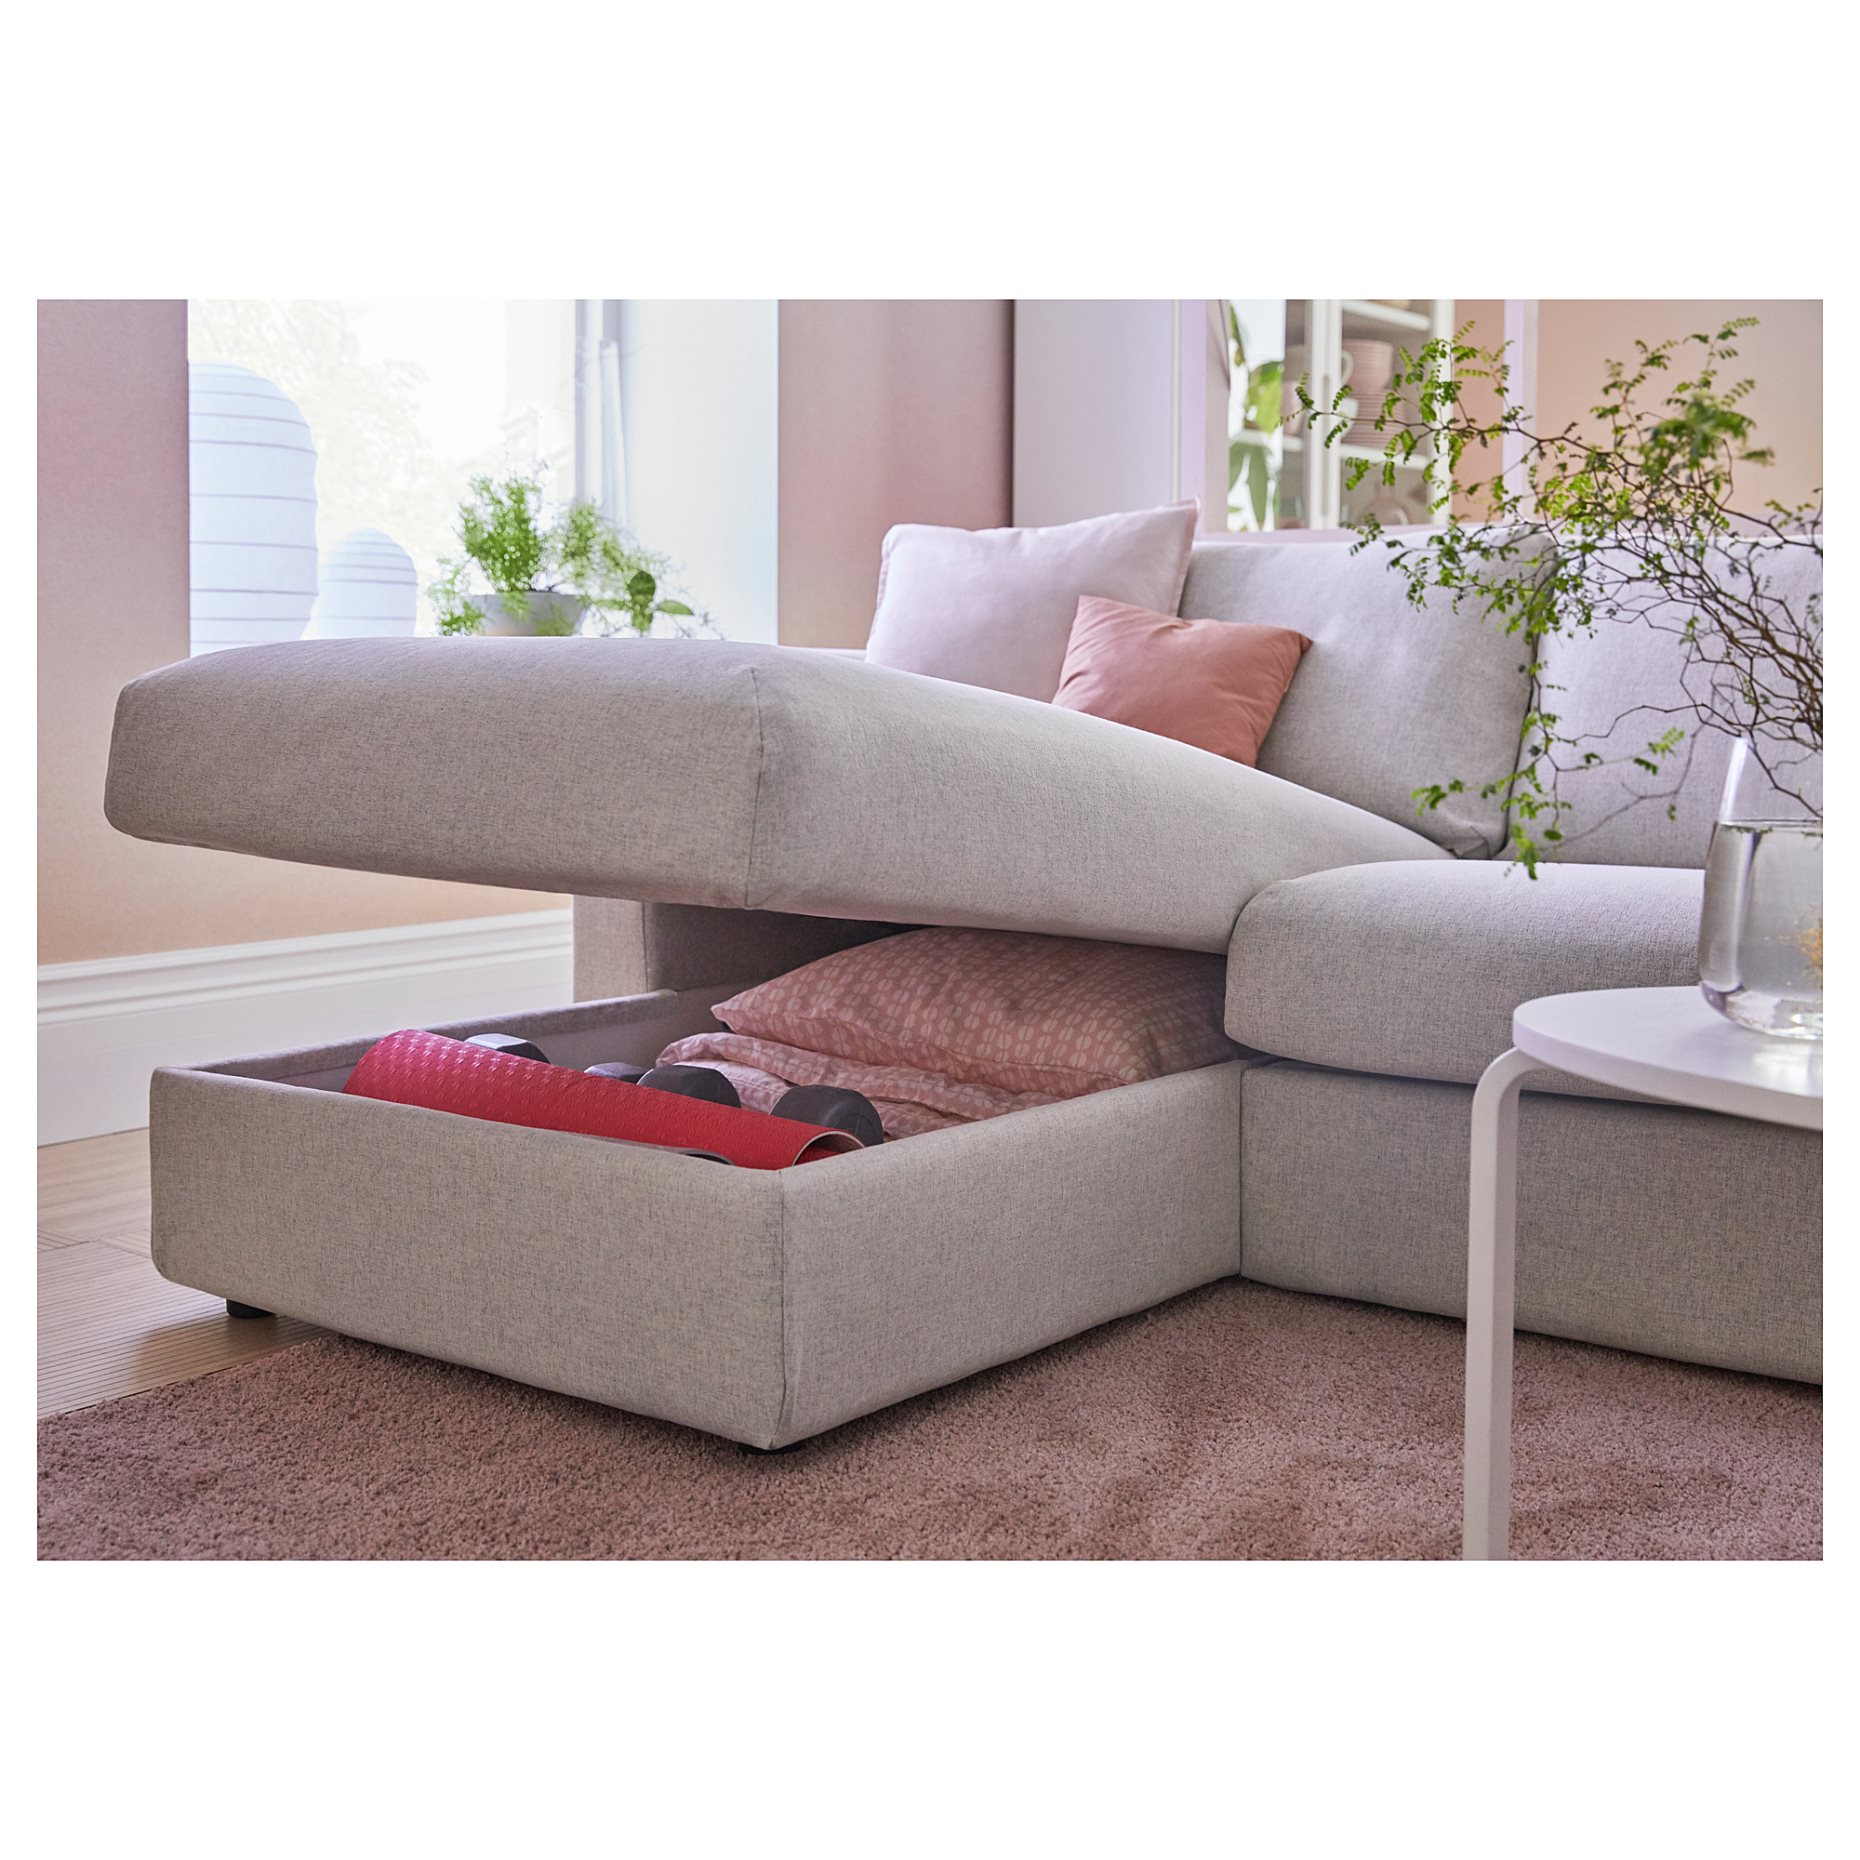 VIMLE, 3-seat sofa-bed with wide armrests and chaise longue, 295.452.13